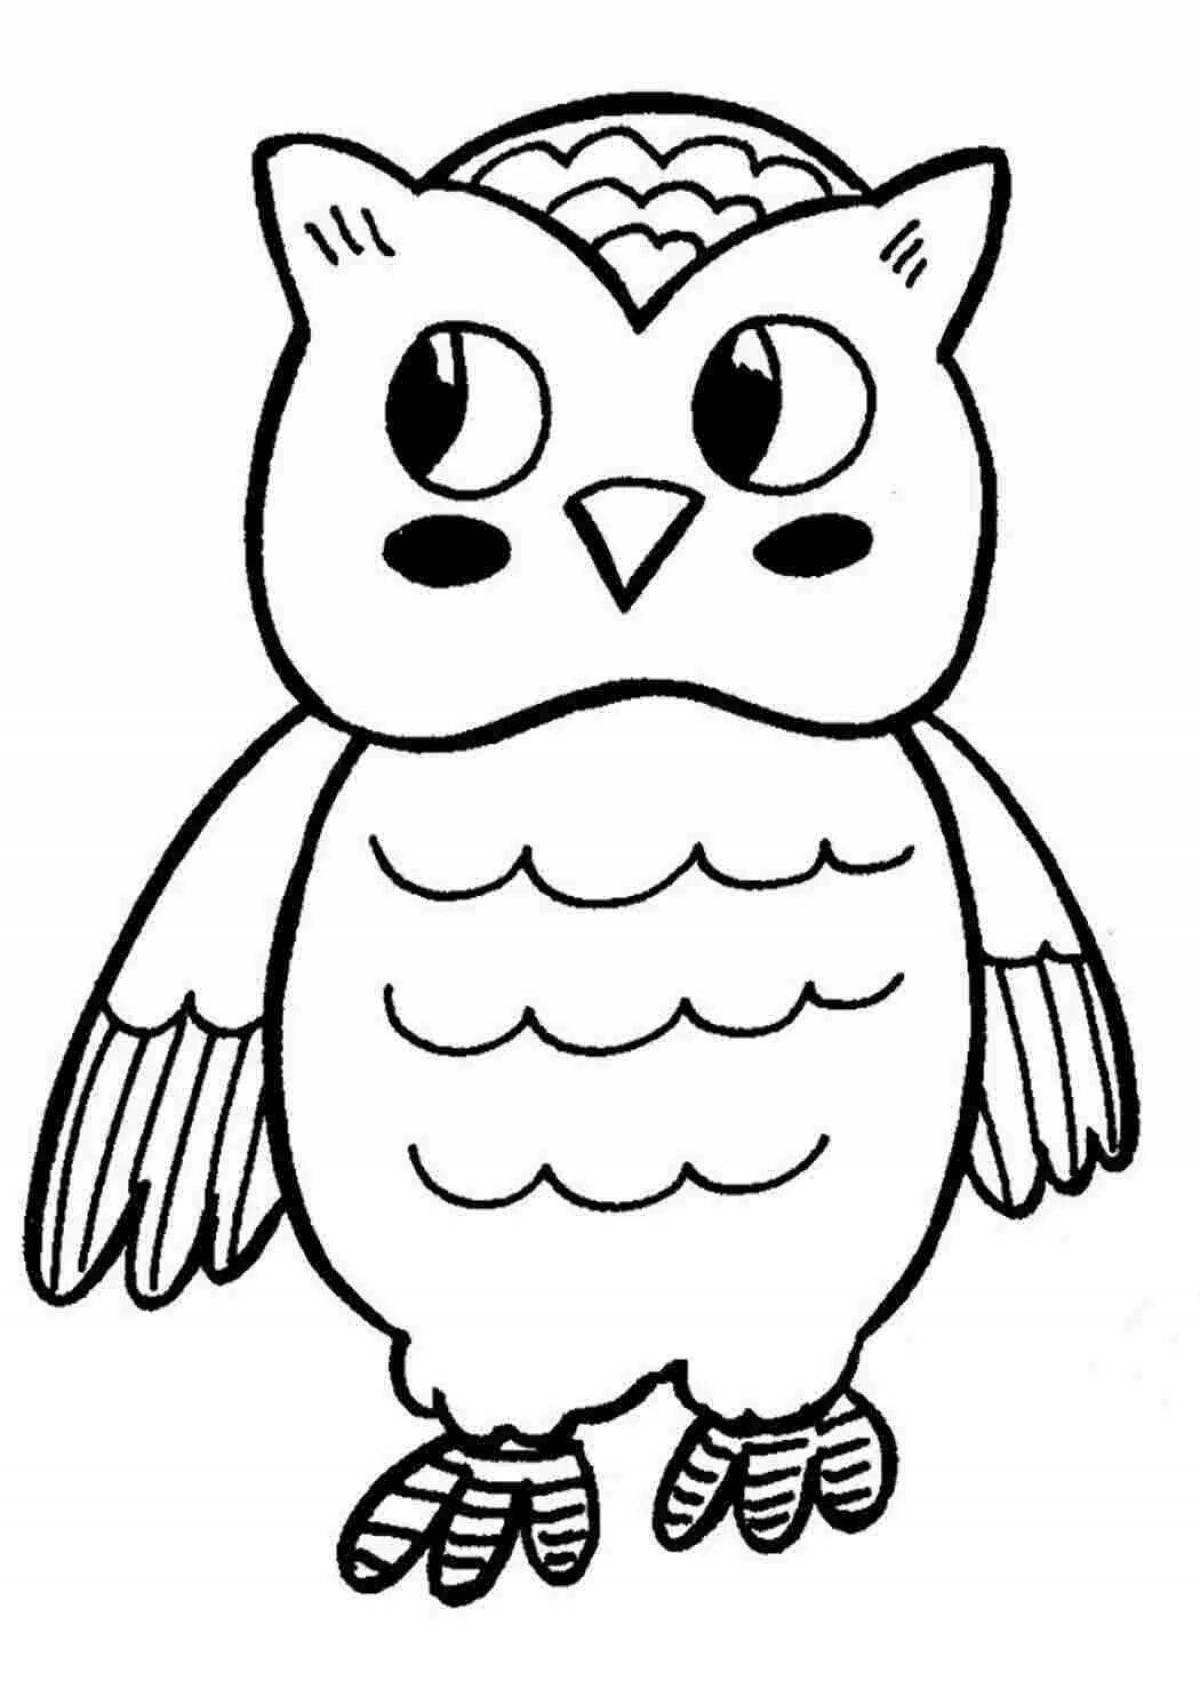 Sweet owlet coloring for kids